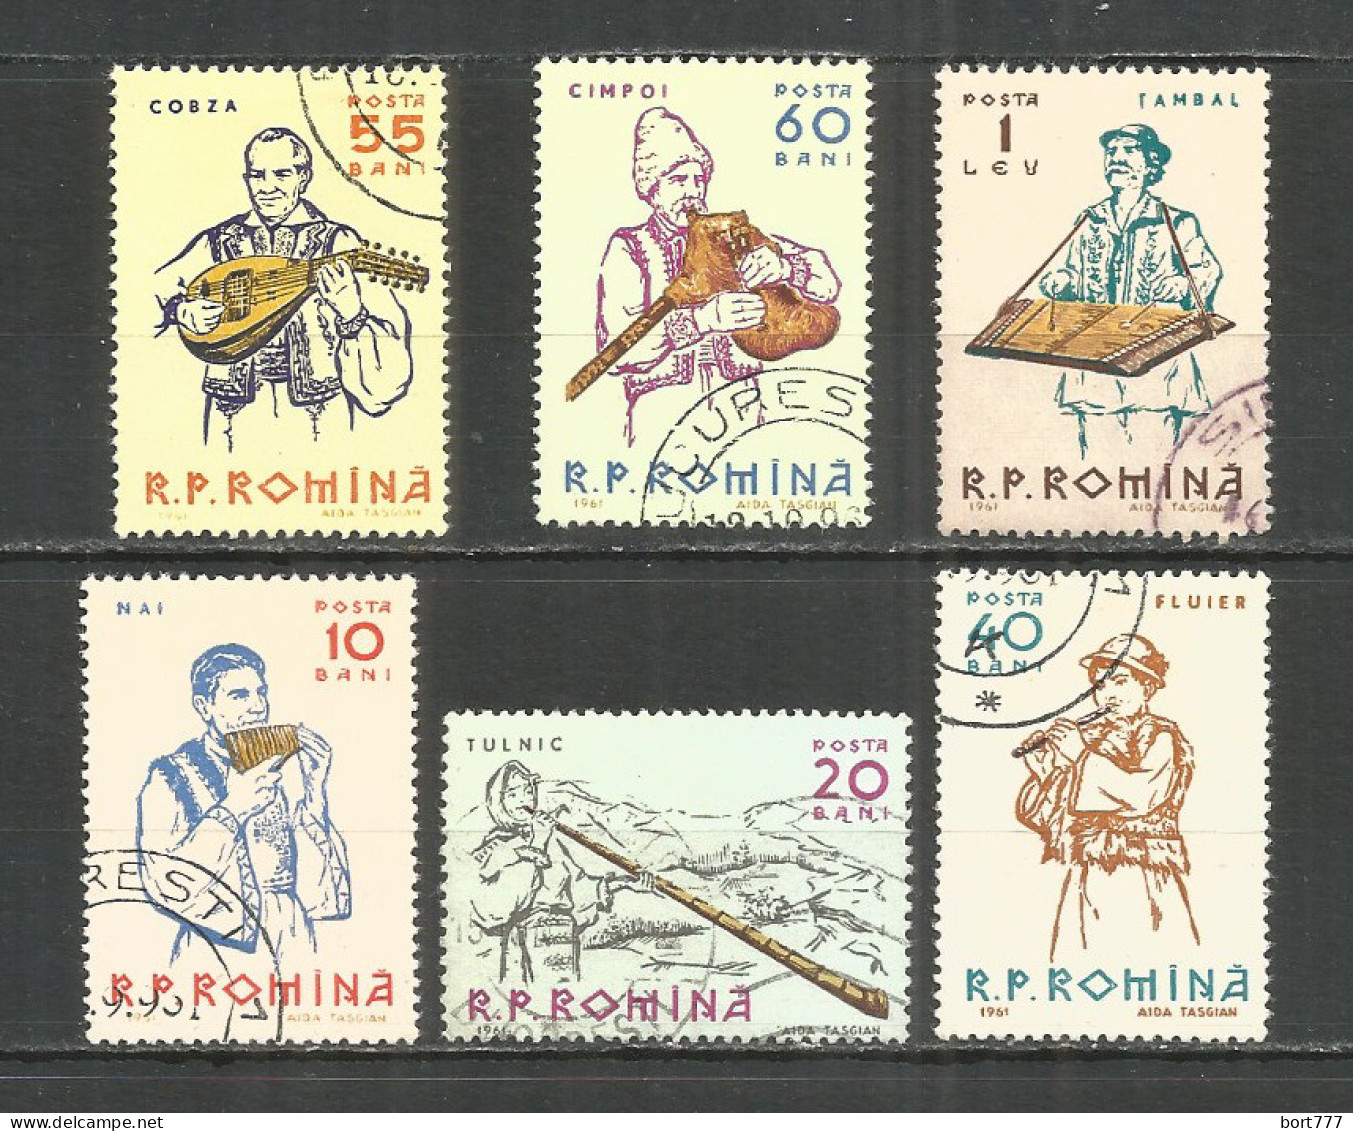 Romania 1961 Used Stamps Set  - Used Stamps